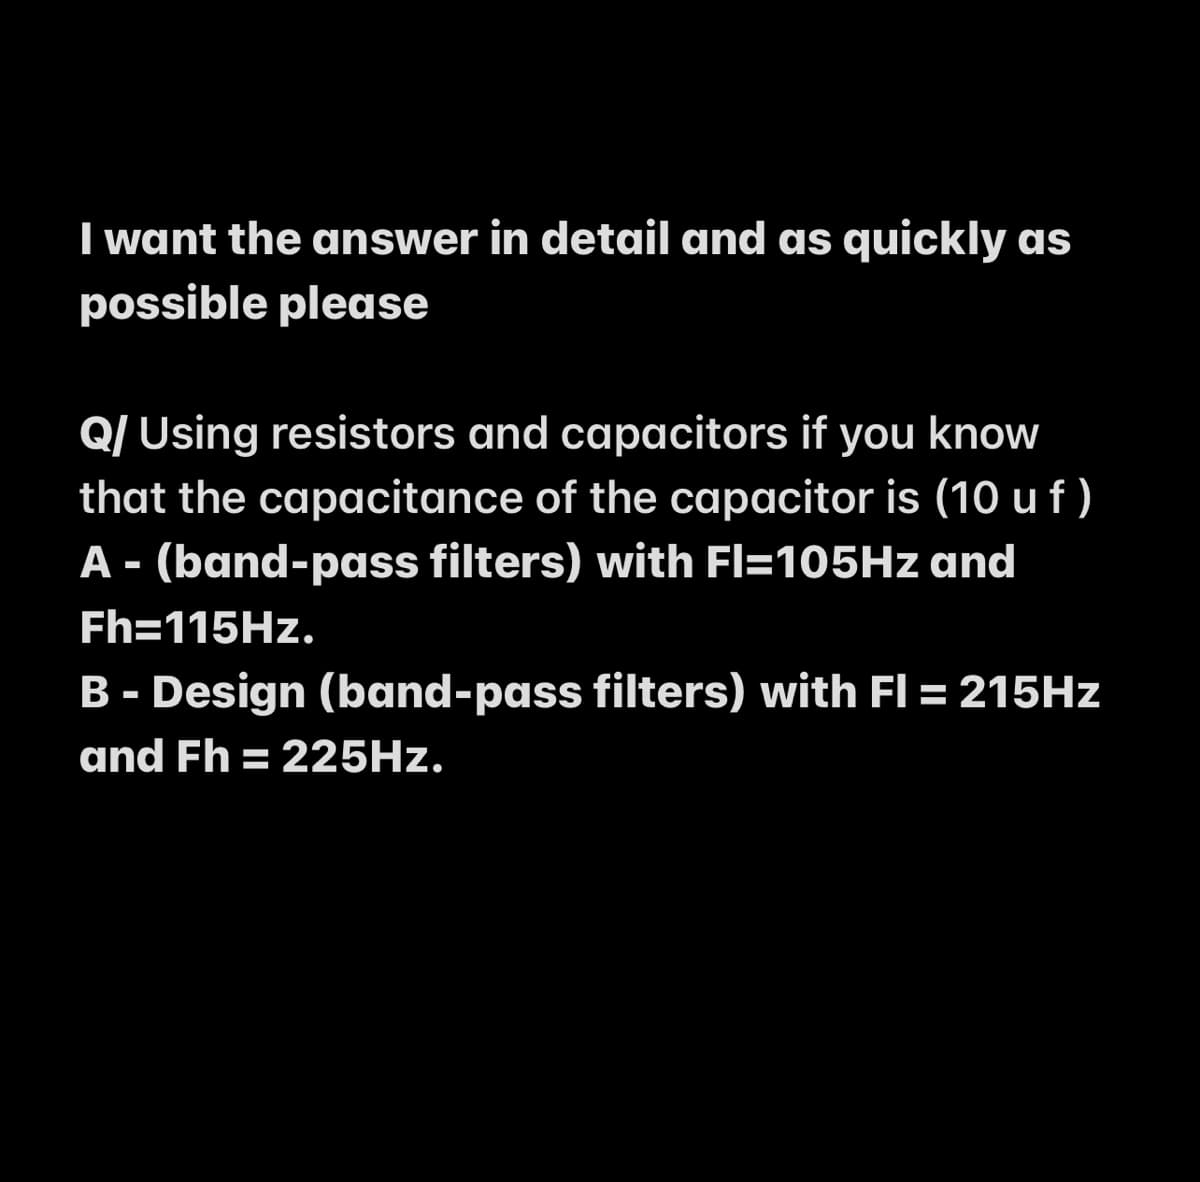 I want the answer in detail and as quickly as
possible please
Q/ Using resistors and capacitors if you know
that the capacitance of the capacitor is (10 uf )
A - (band-pass filters) with Fl=105HZ and
Fh=115HZ.
B - Design (band-pass filters) with Fl = 215HZ
and Fh = 225HZ.
